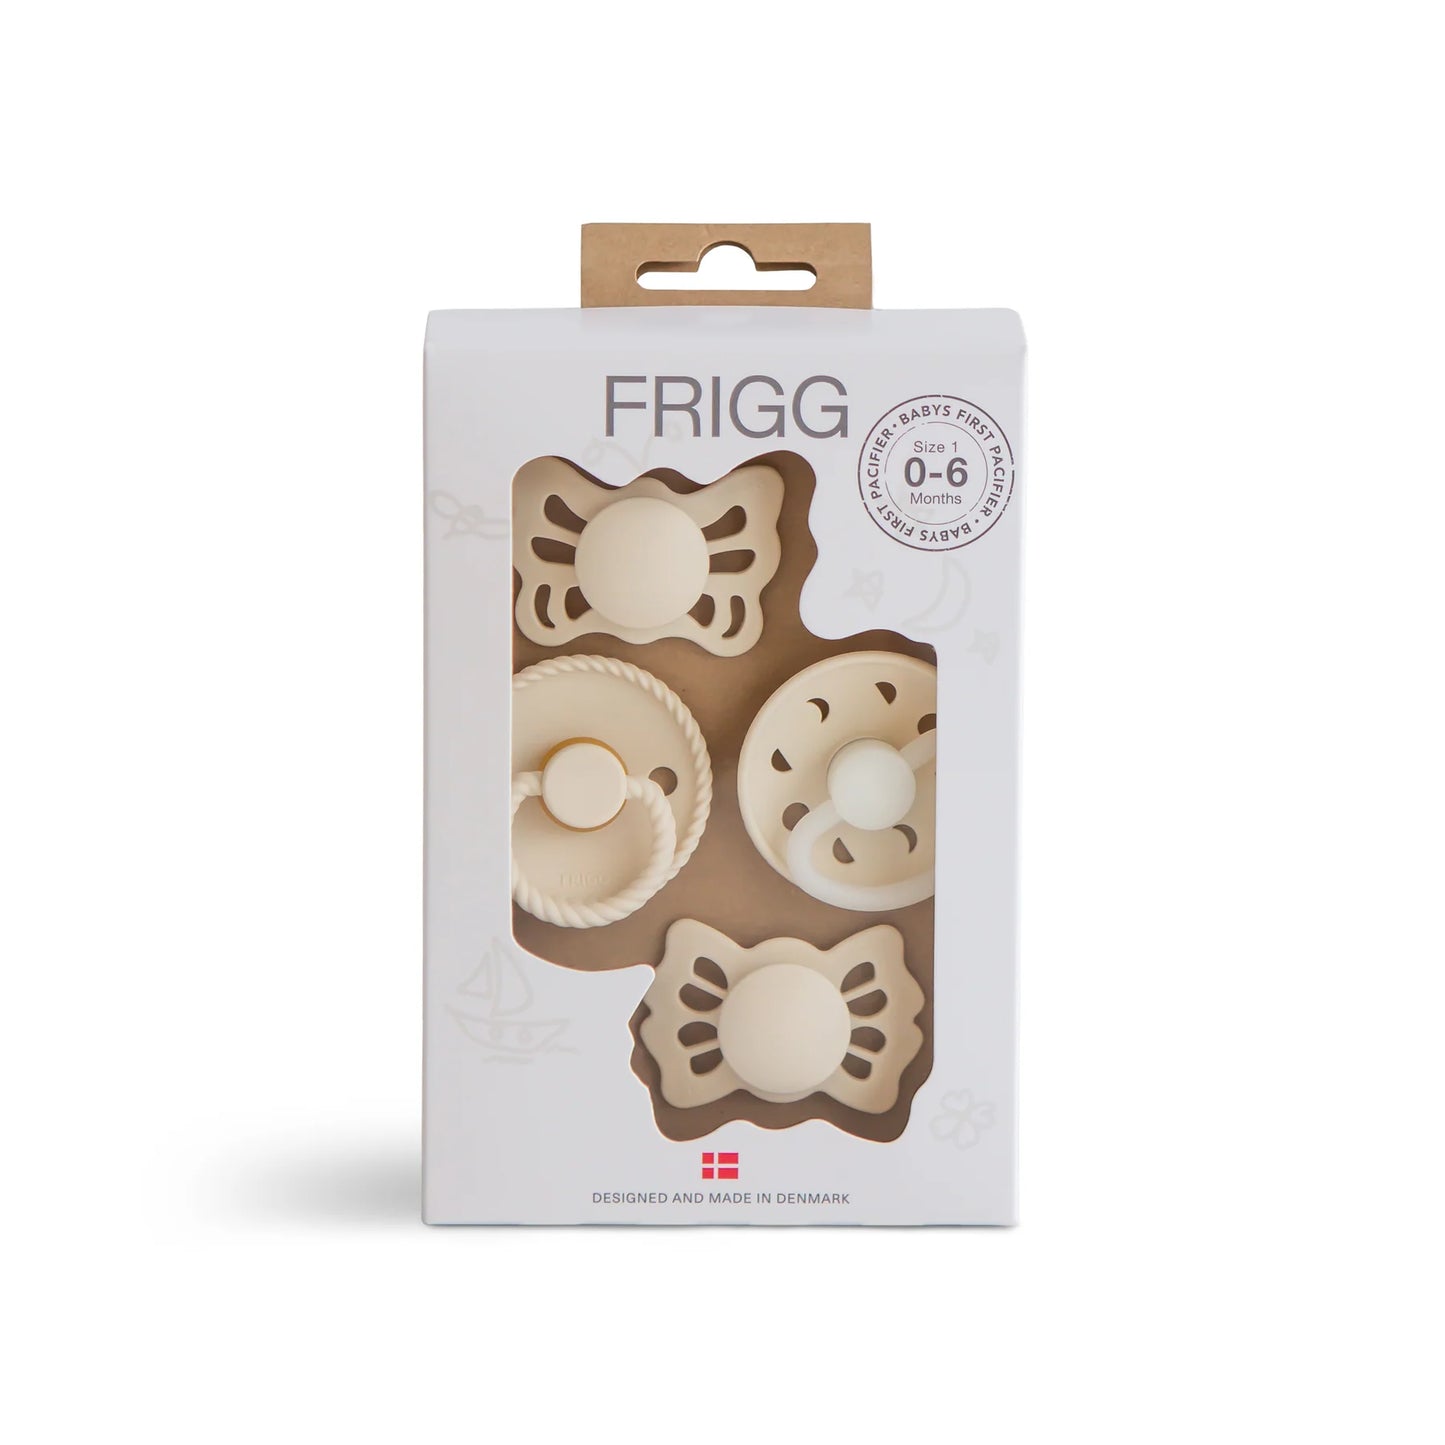 FRIGG | Baby's First Pacifier 4-pack - Moonlight Sailing Cream ( 0-6 Months )